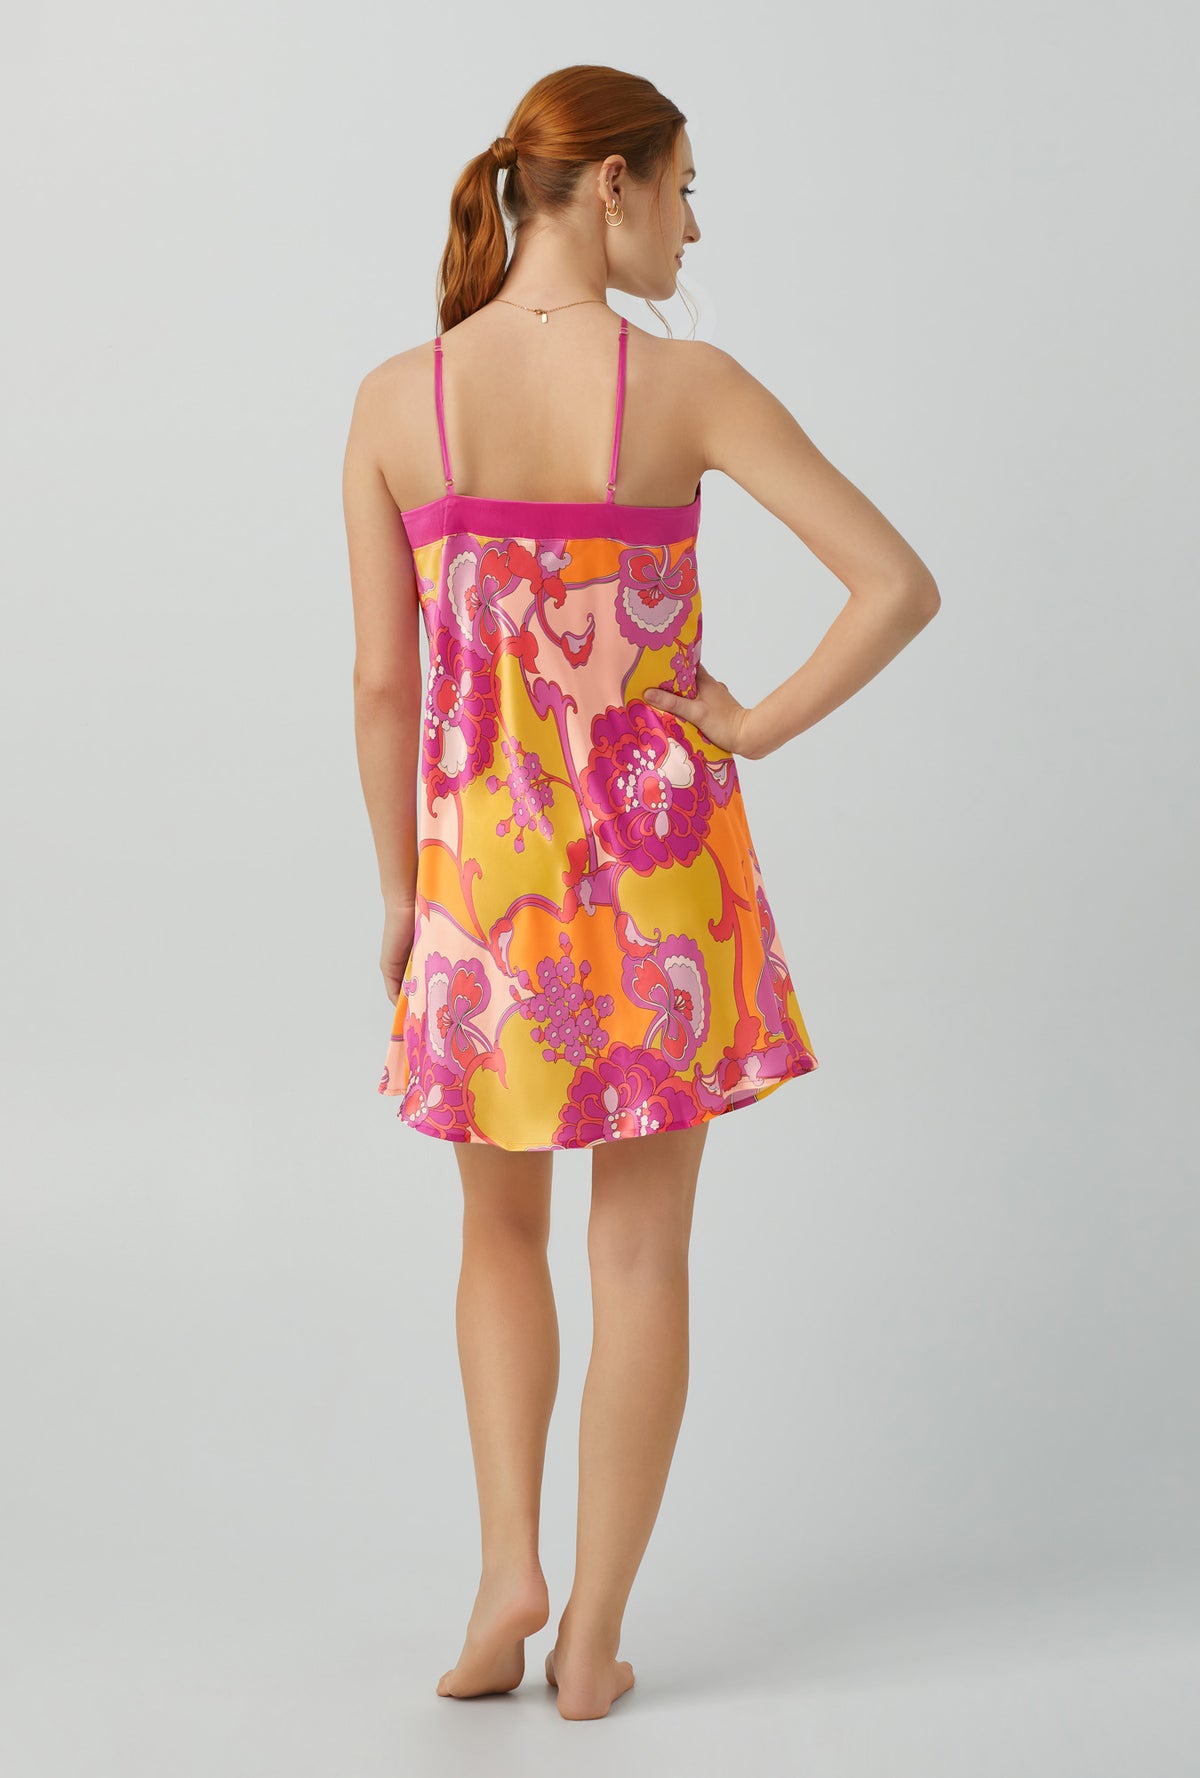 A lady wearing Silk Satin Chemise with apache bloom print